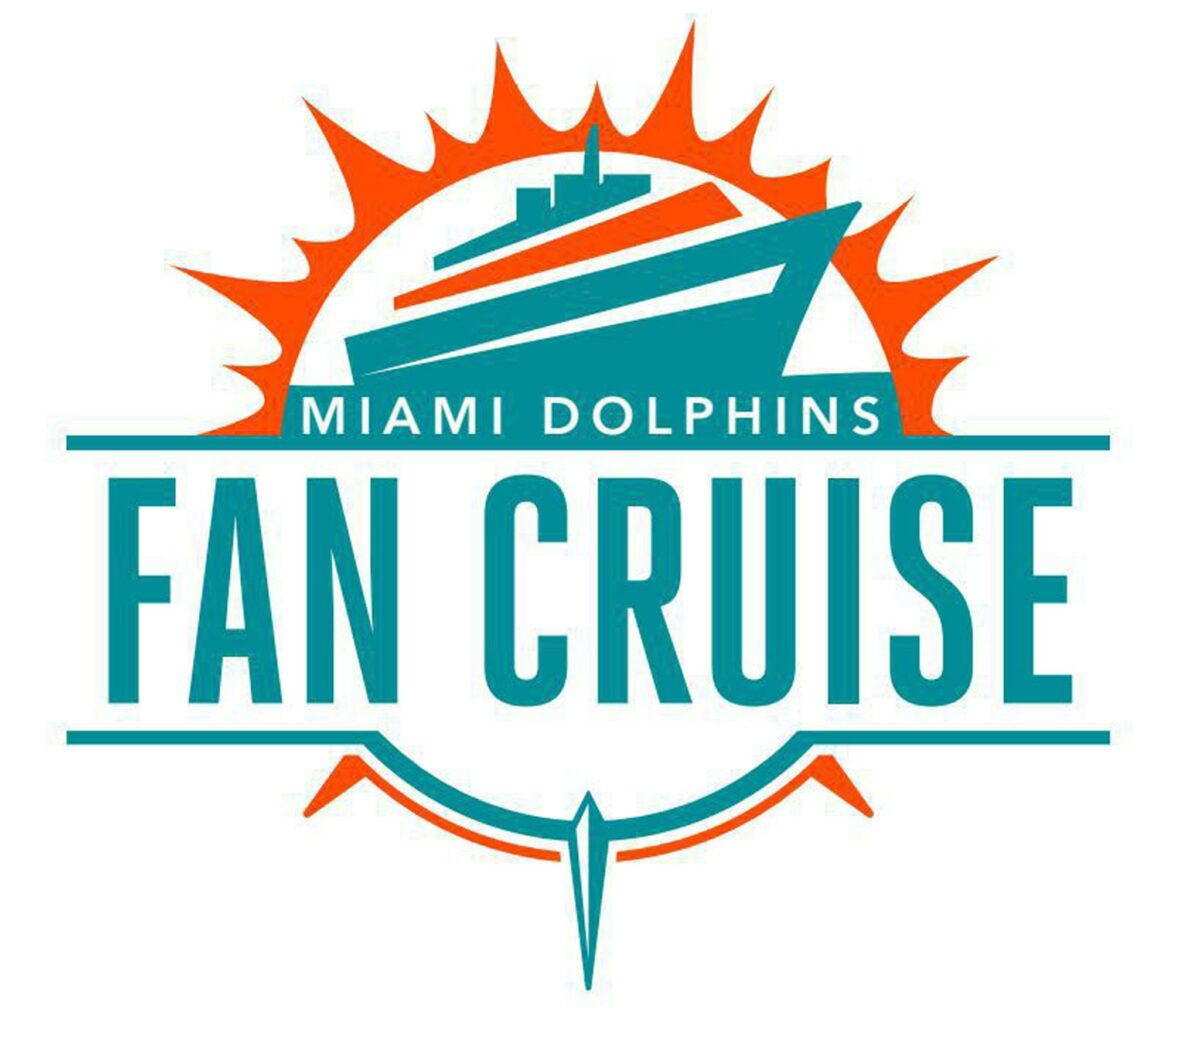 Miami Dolphins Fan Cruise: The perfect backfield, a wildcat and more